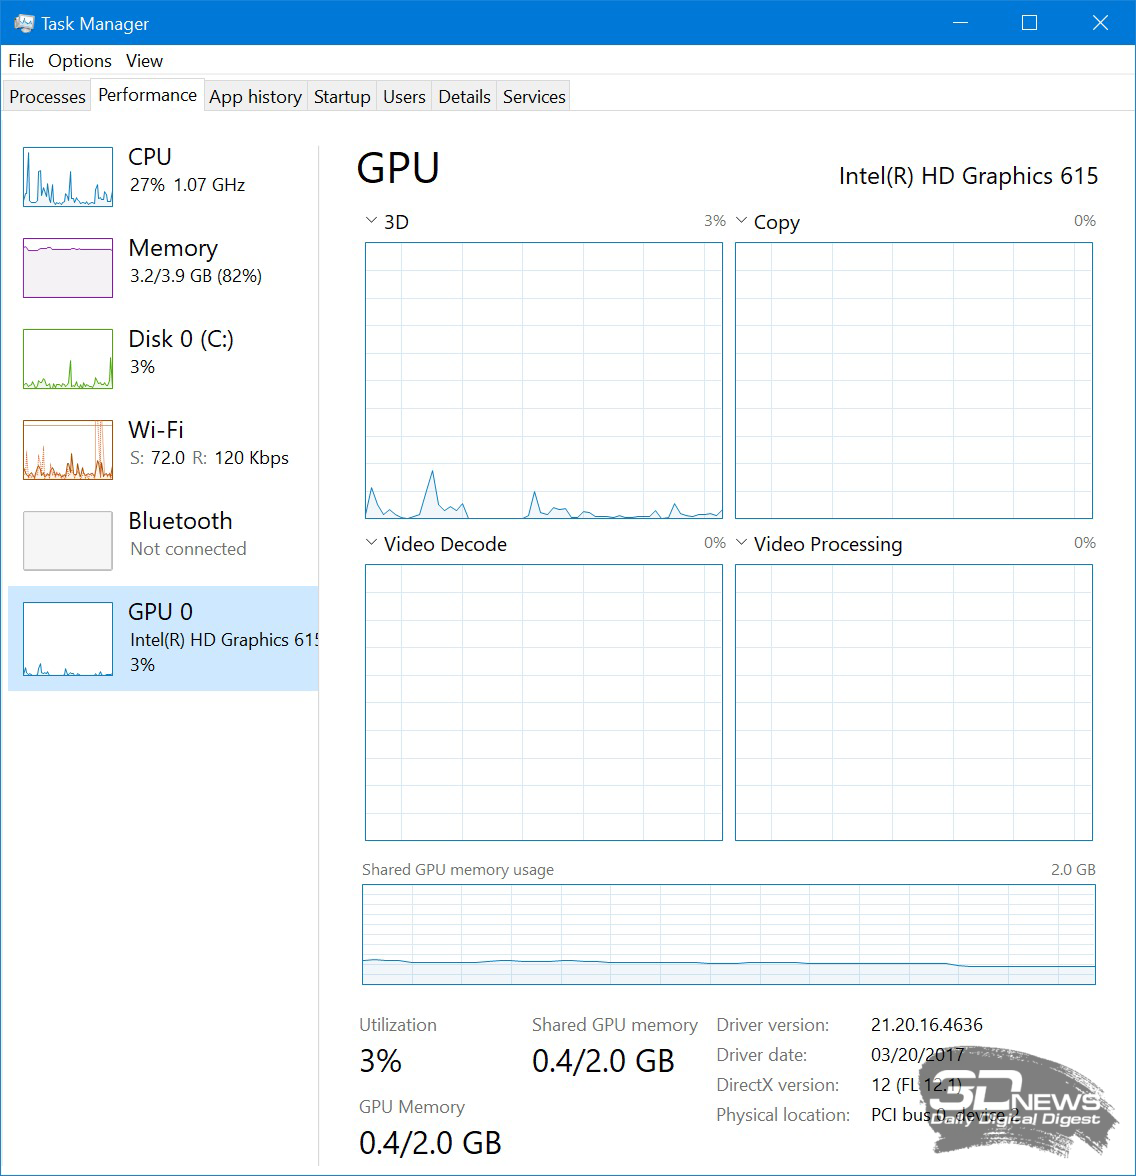 Windows 10 Fall Creators Update introduces graphics performance controls - Windows 10, Update, Task Manager, Video card, Finished